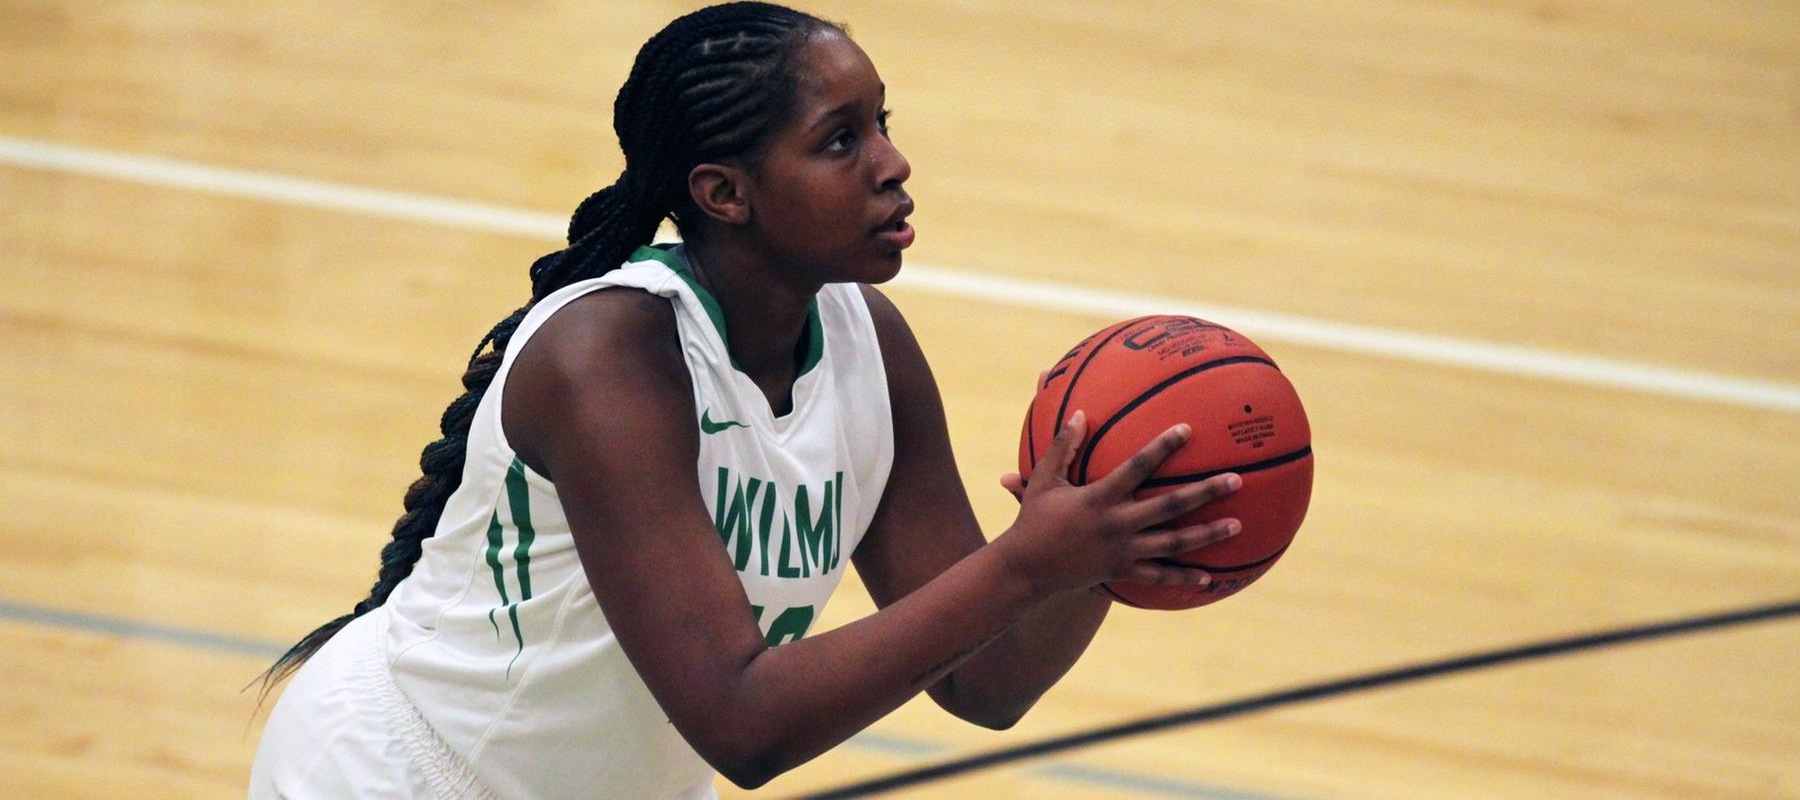 Copyright 2019; Wilmington University. All rights reserved. File photo of Nyree Grant who led the team with 11 points at No. 11 USciences. Photo by Dan Lauletta. January 5, 2019 vs. Nyack College.